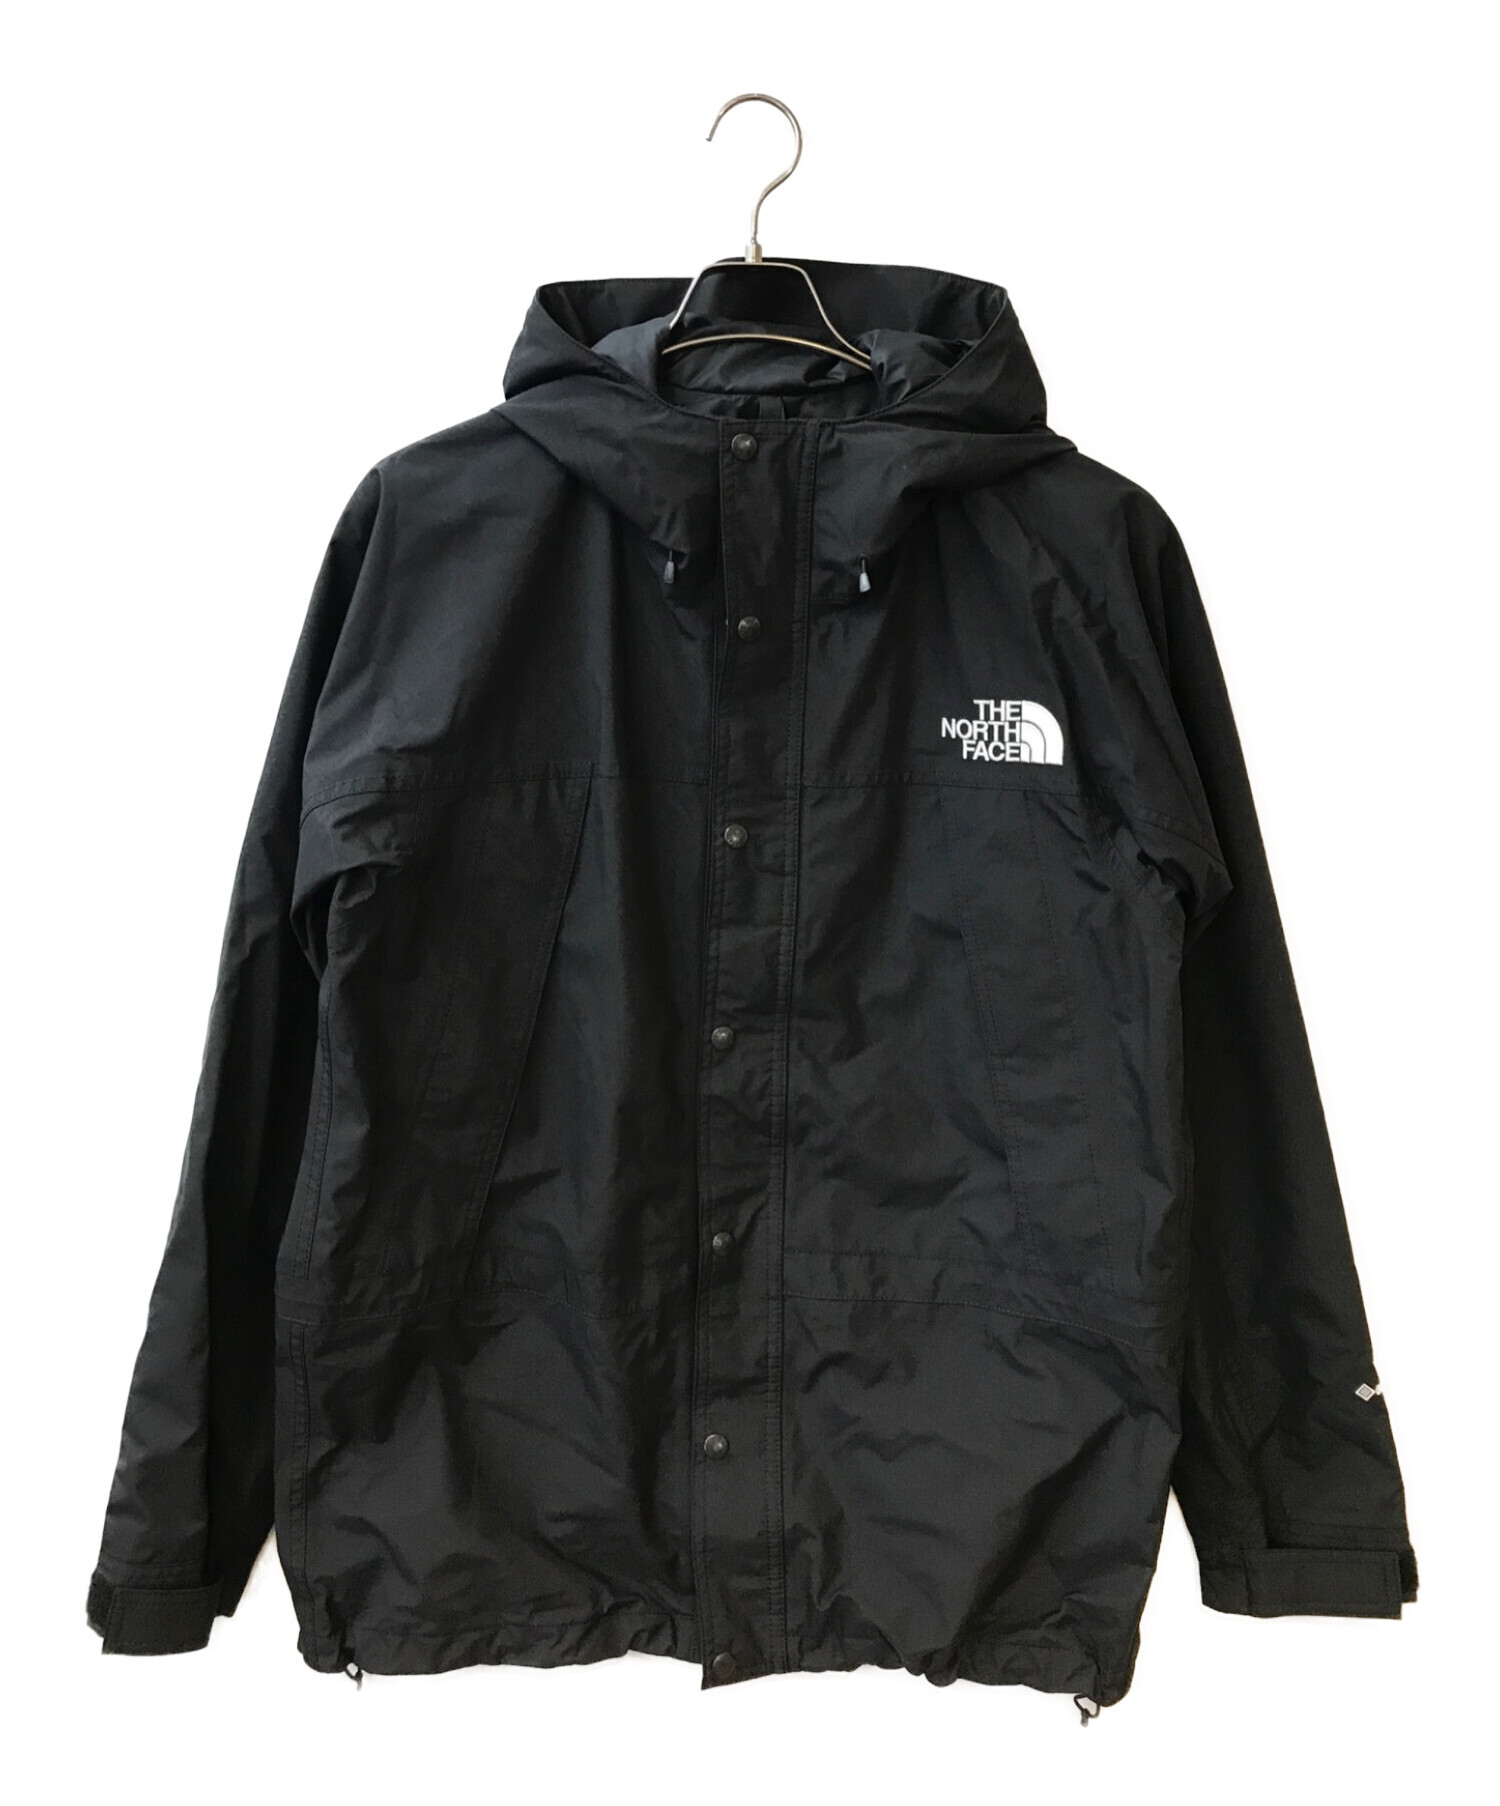 THE NORTH FACE MOUNTAIN LIGHT JKT XLまたSup